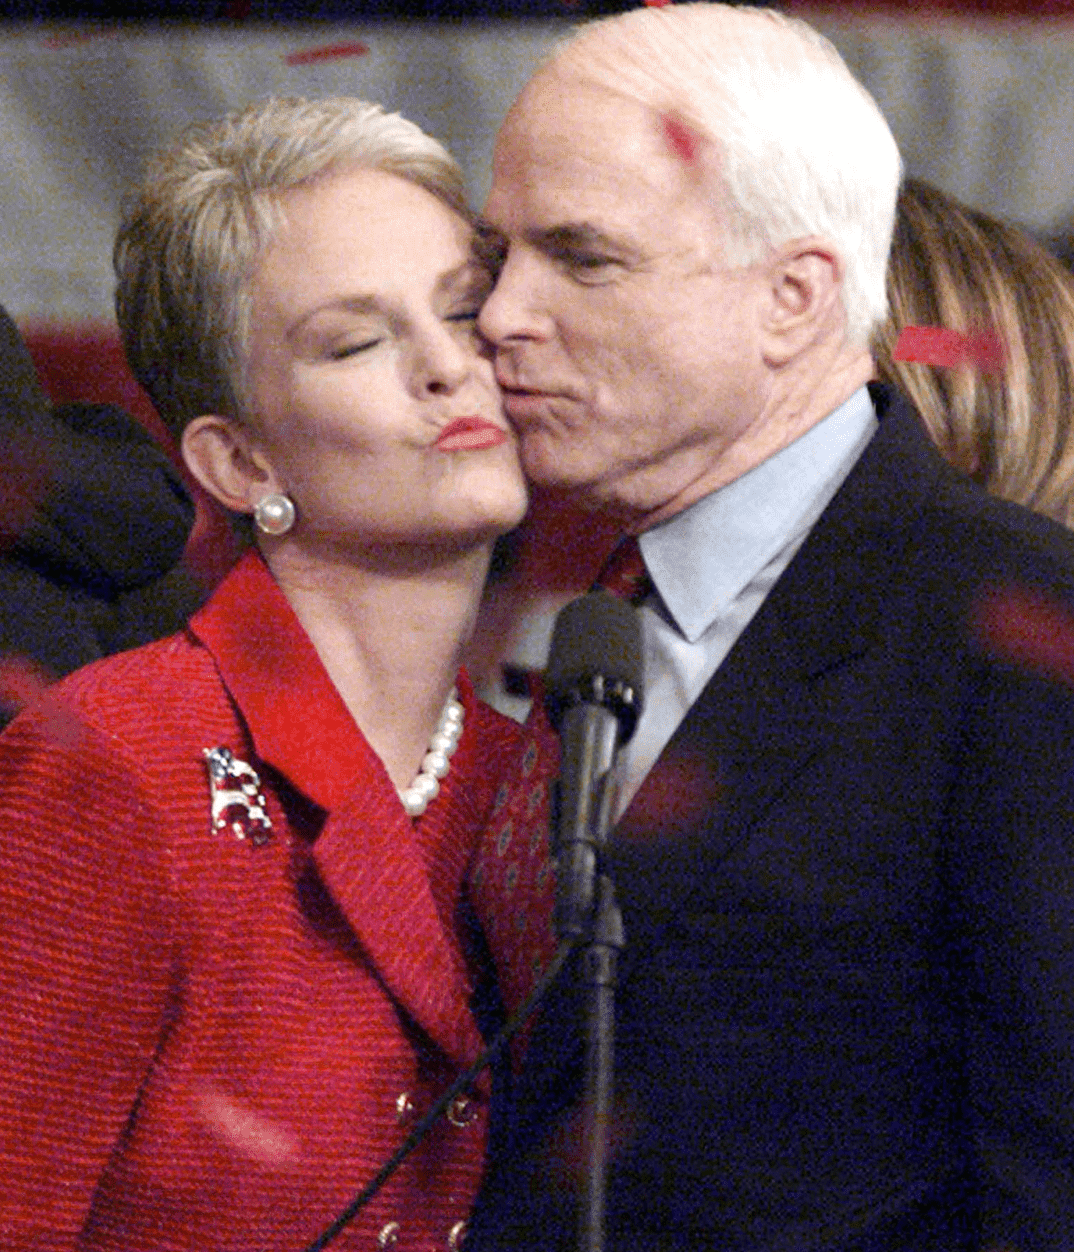 John McCain kisses his wife Cindy during a victory celebration. | Source: Getty Images